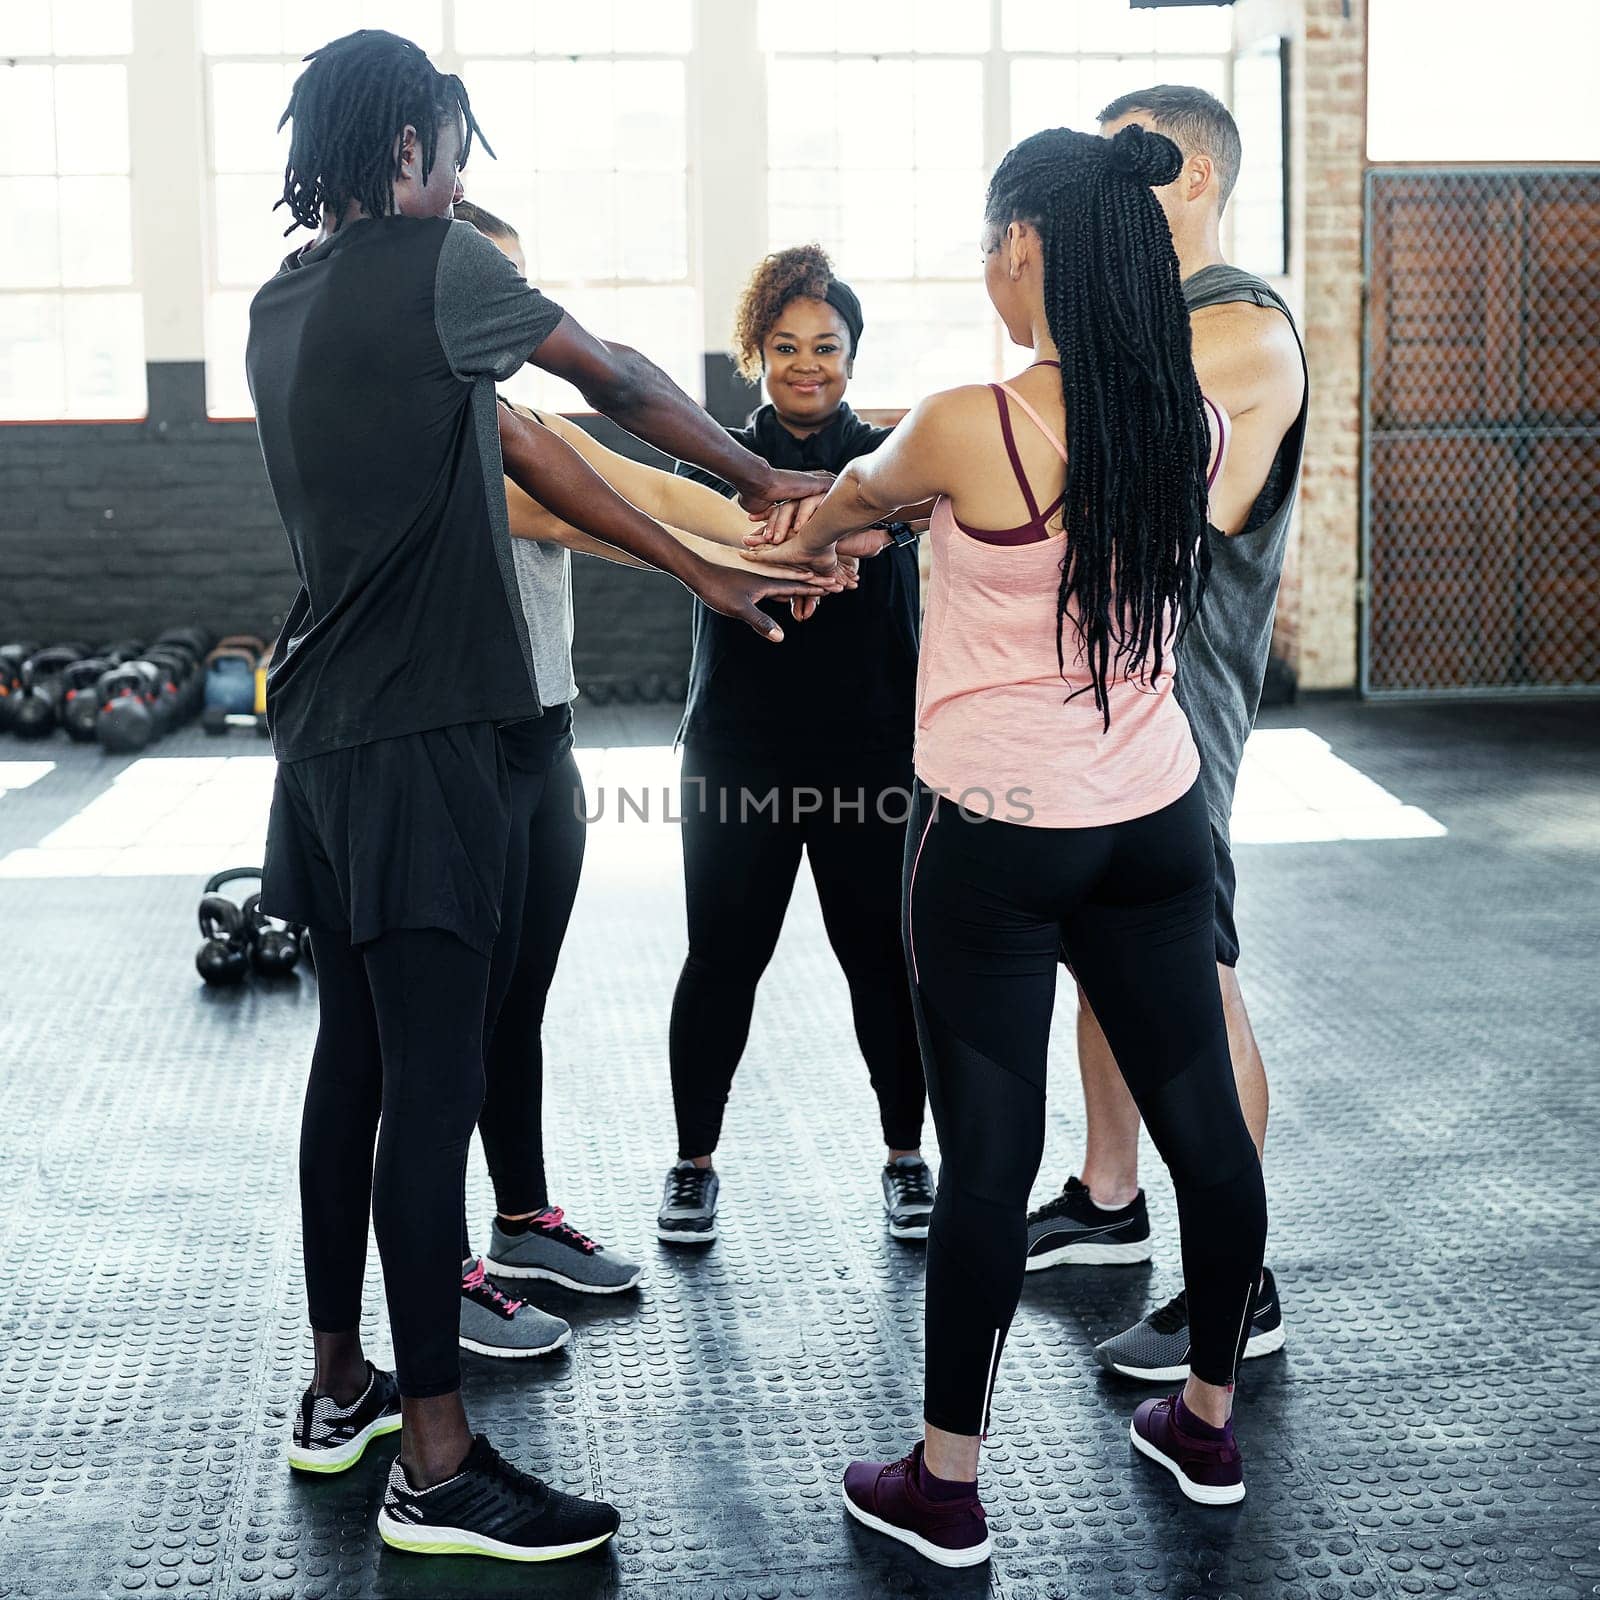 All about that fitness. a cheerful young group of people forming a huddle together while one looks at the camera before a workout session in a gym